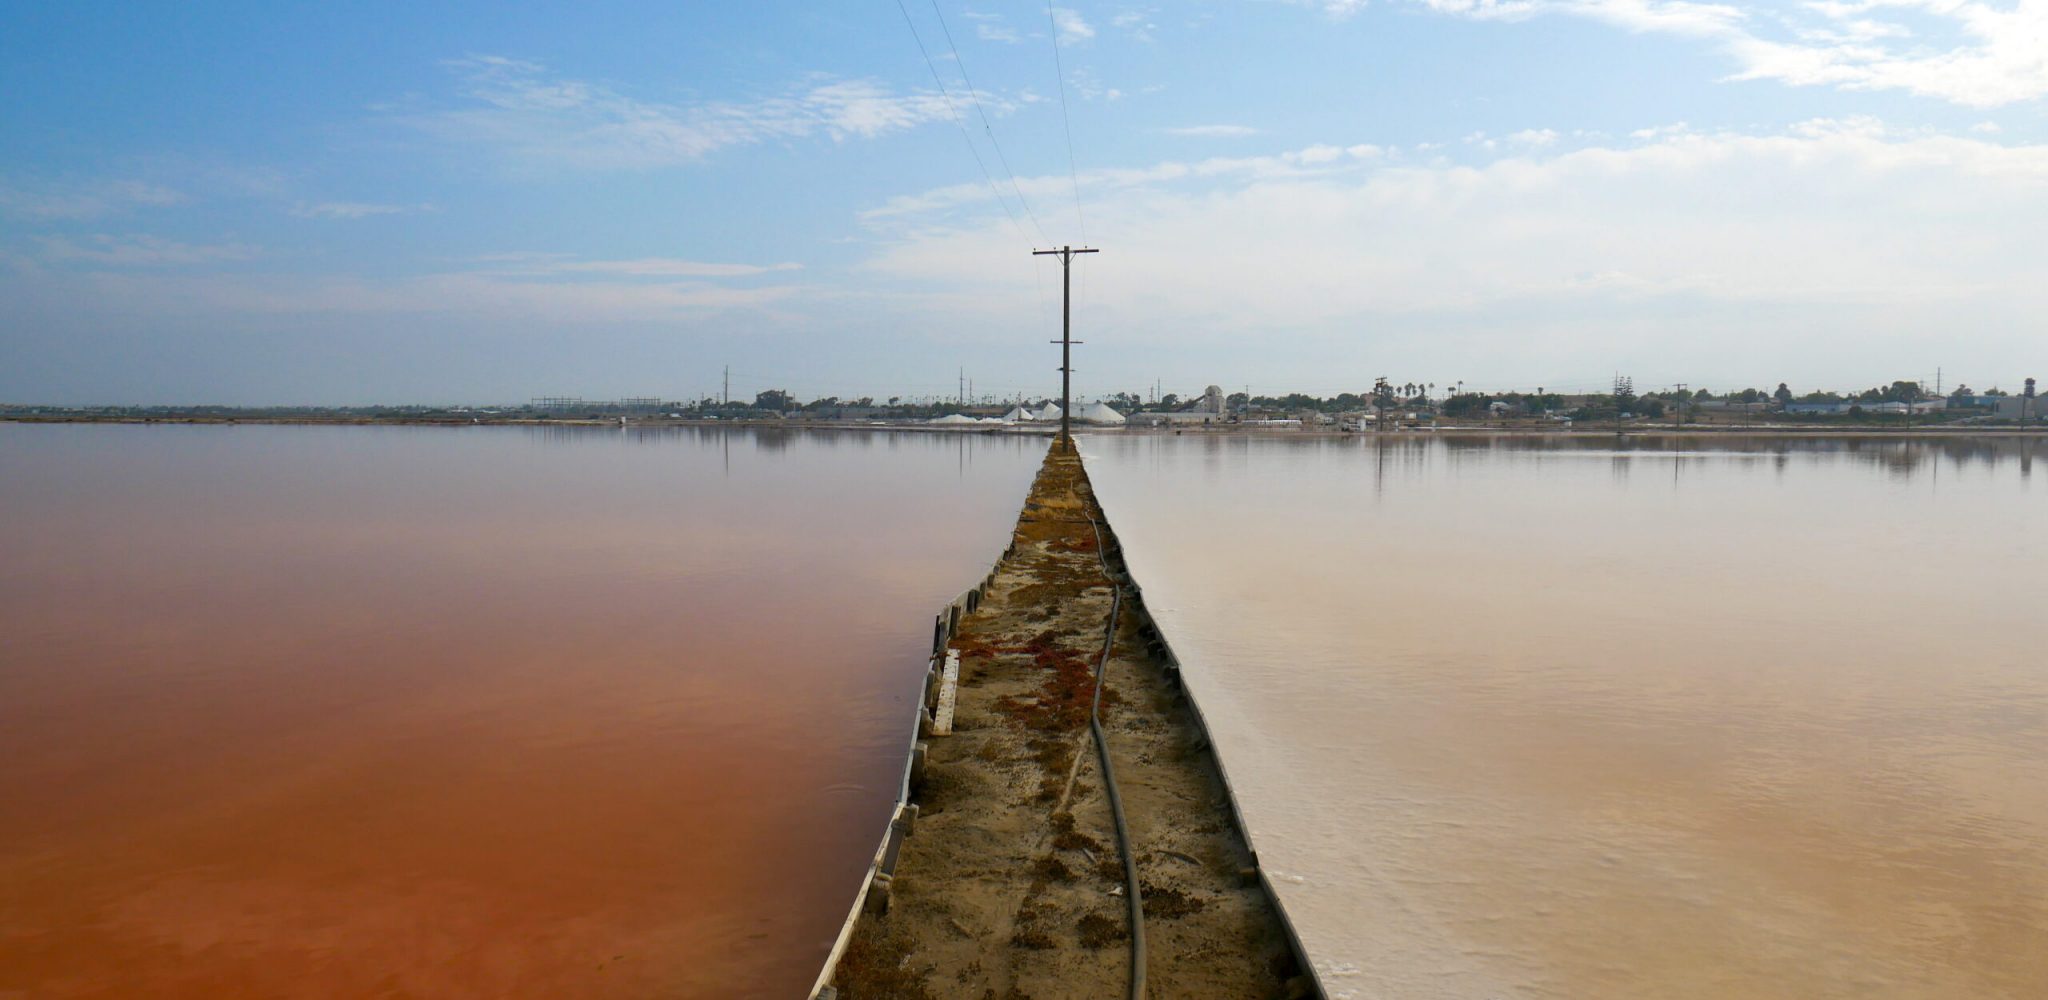 A dirt path separates two salt ponds on either side. On the left, a deep pink-red pond with still water, and on the right, a white-pink lake with still water.